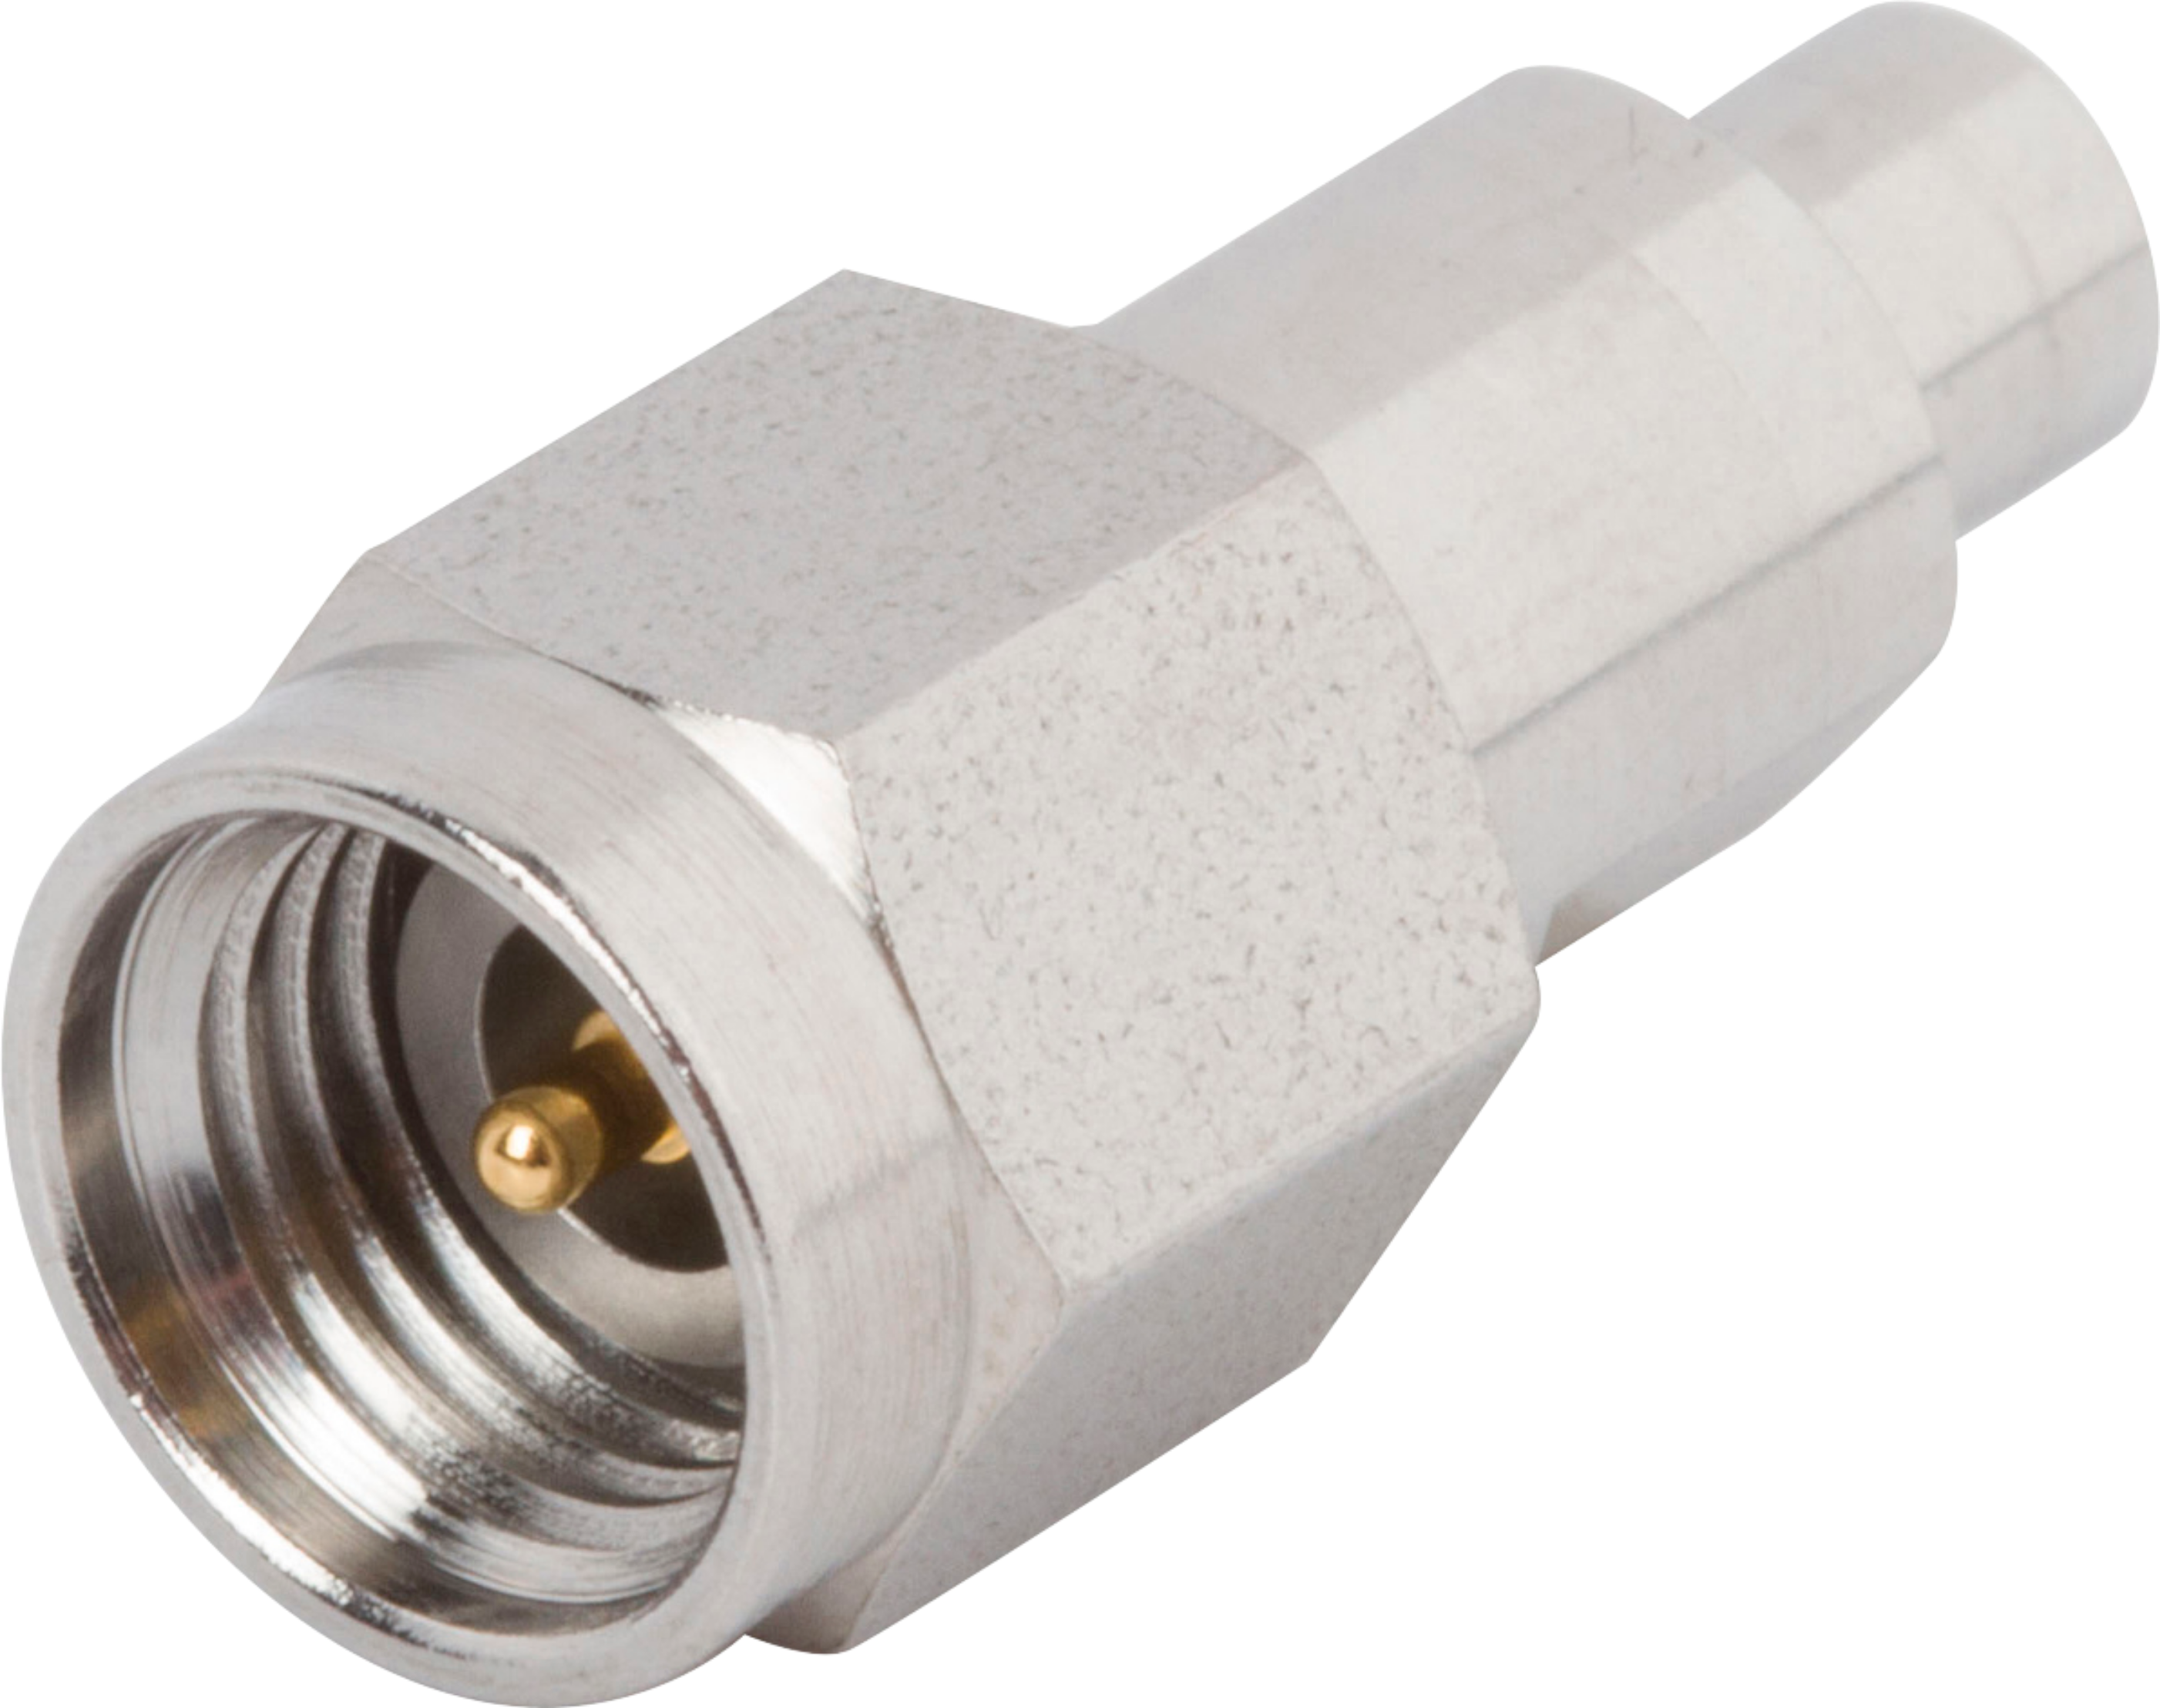 2.92mm Male to SMPM Male Adapter, FD, SF1115-6086